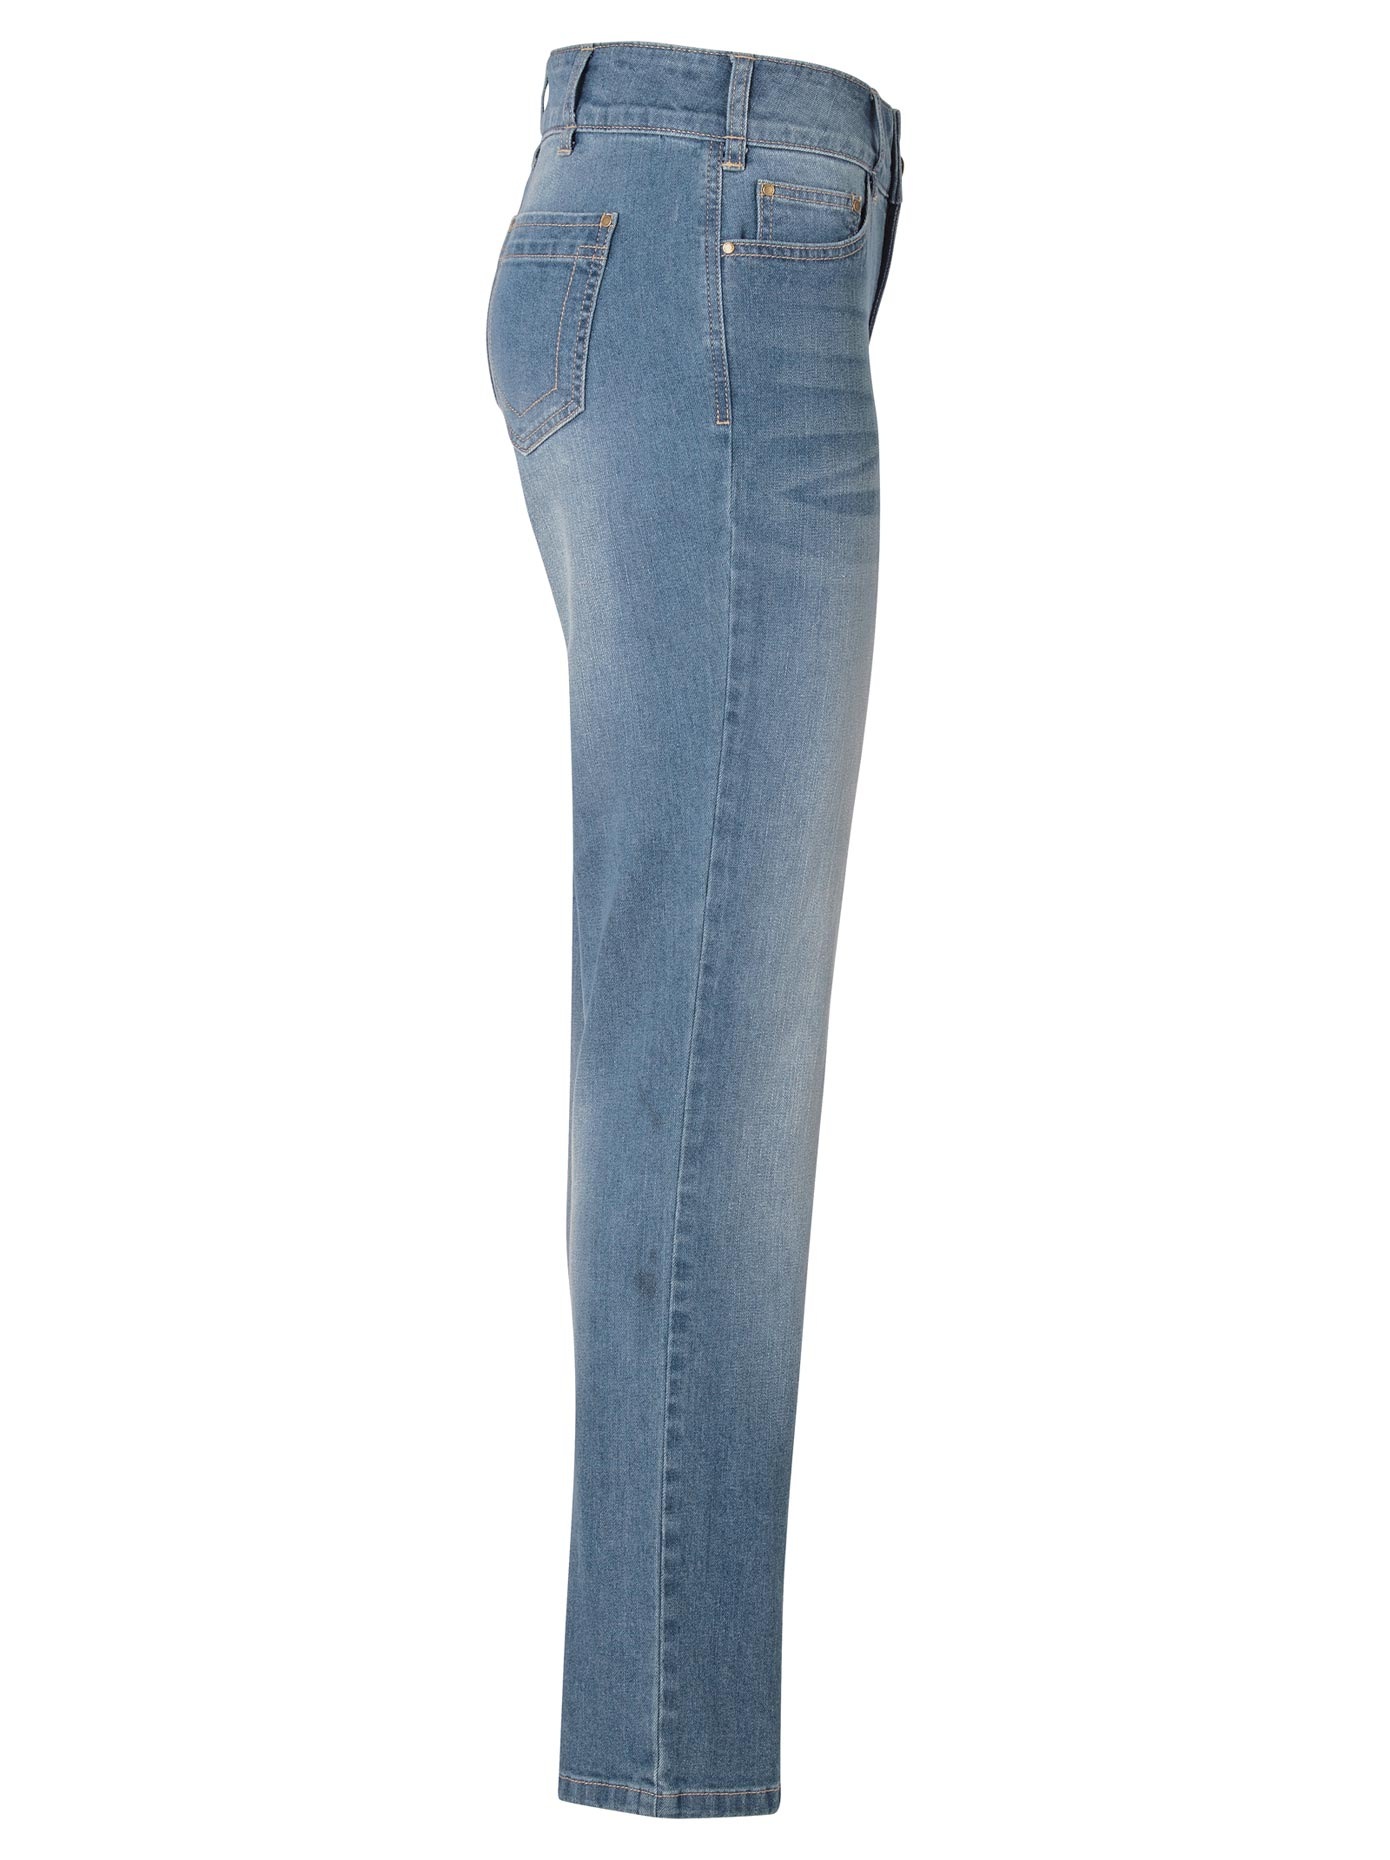 Casual Looks Bequeme Jeans, (1 tlg.) im OTTO Online Shop